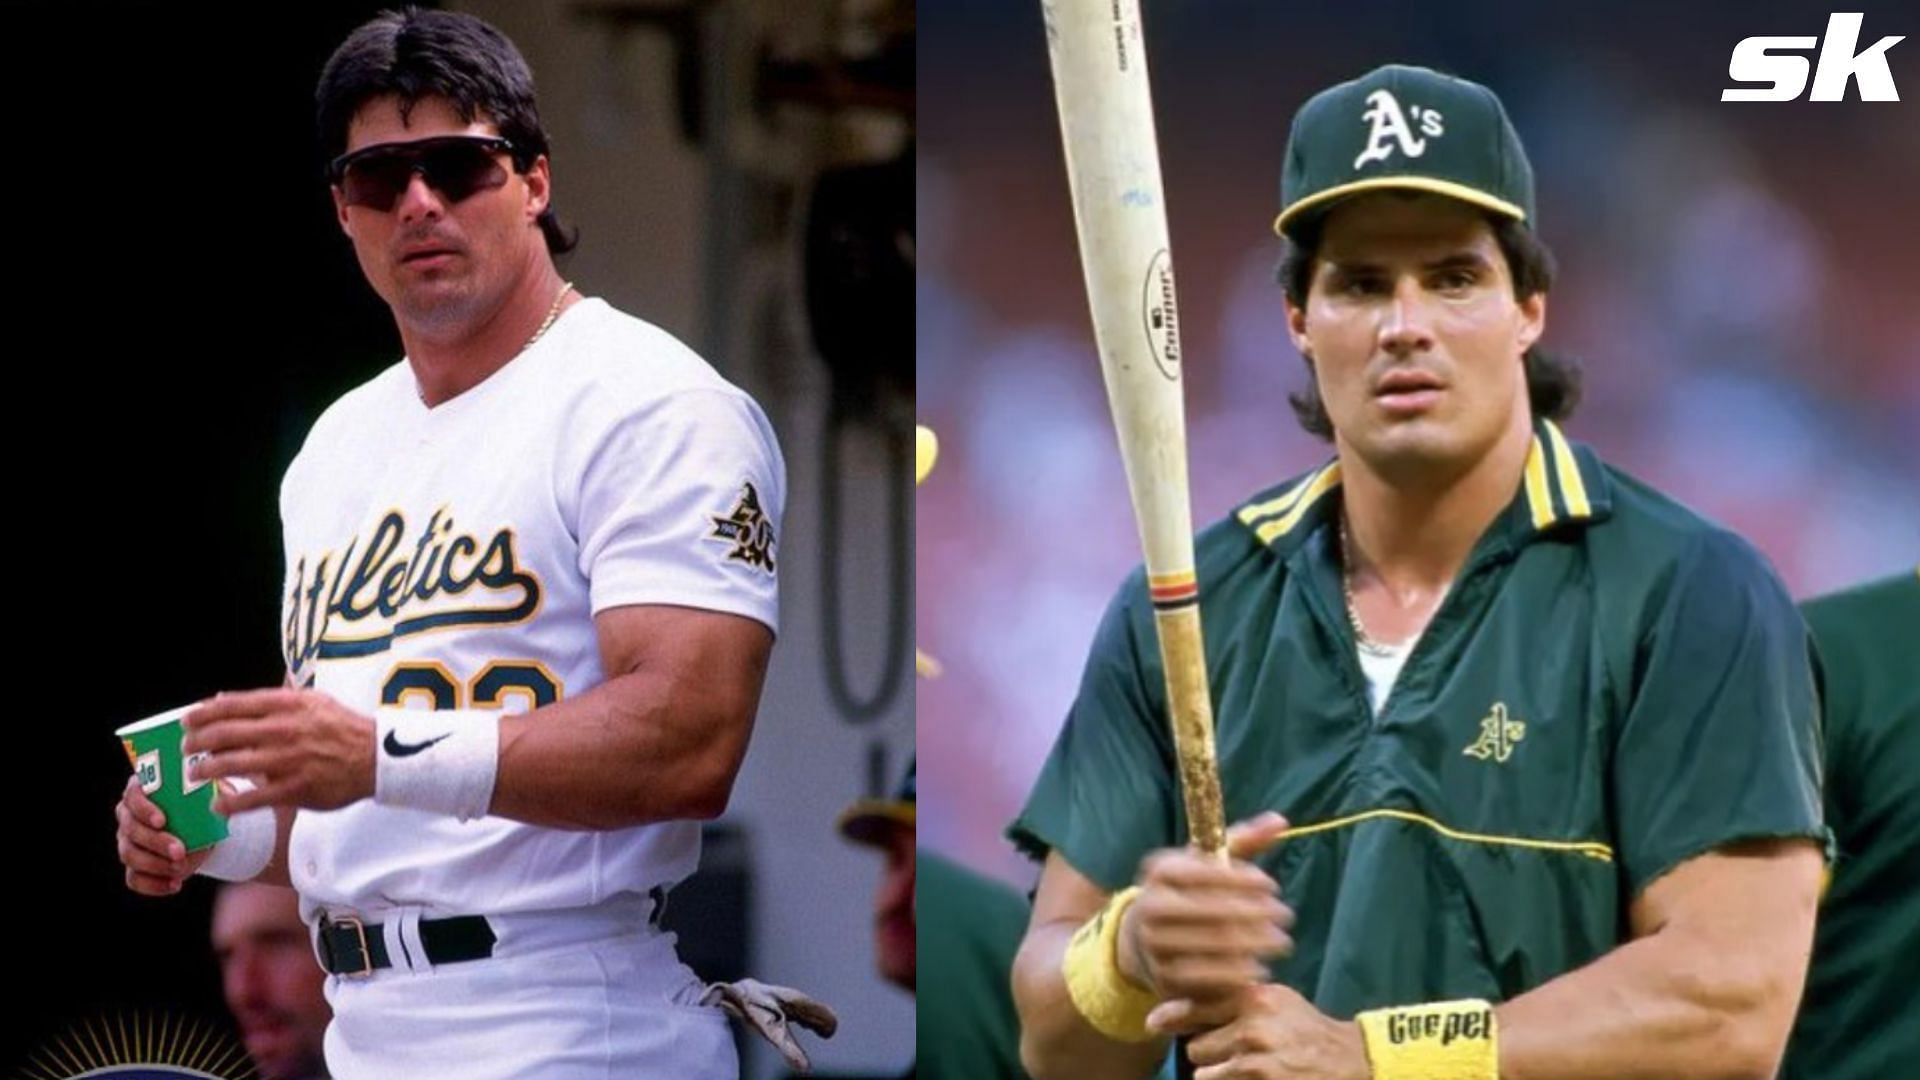 Jose Canseco regrets his steroids use, says performance enhancers